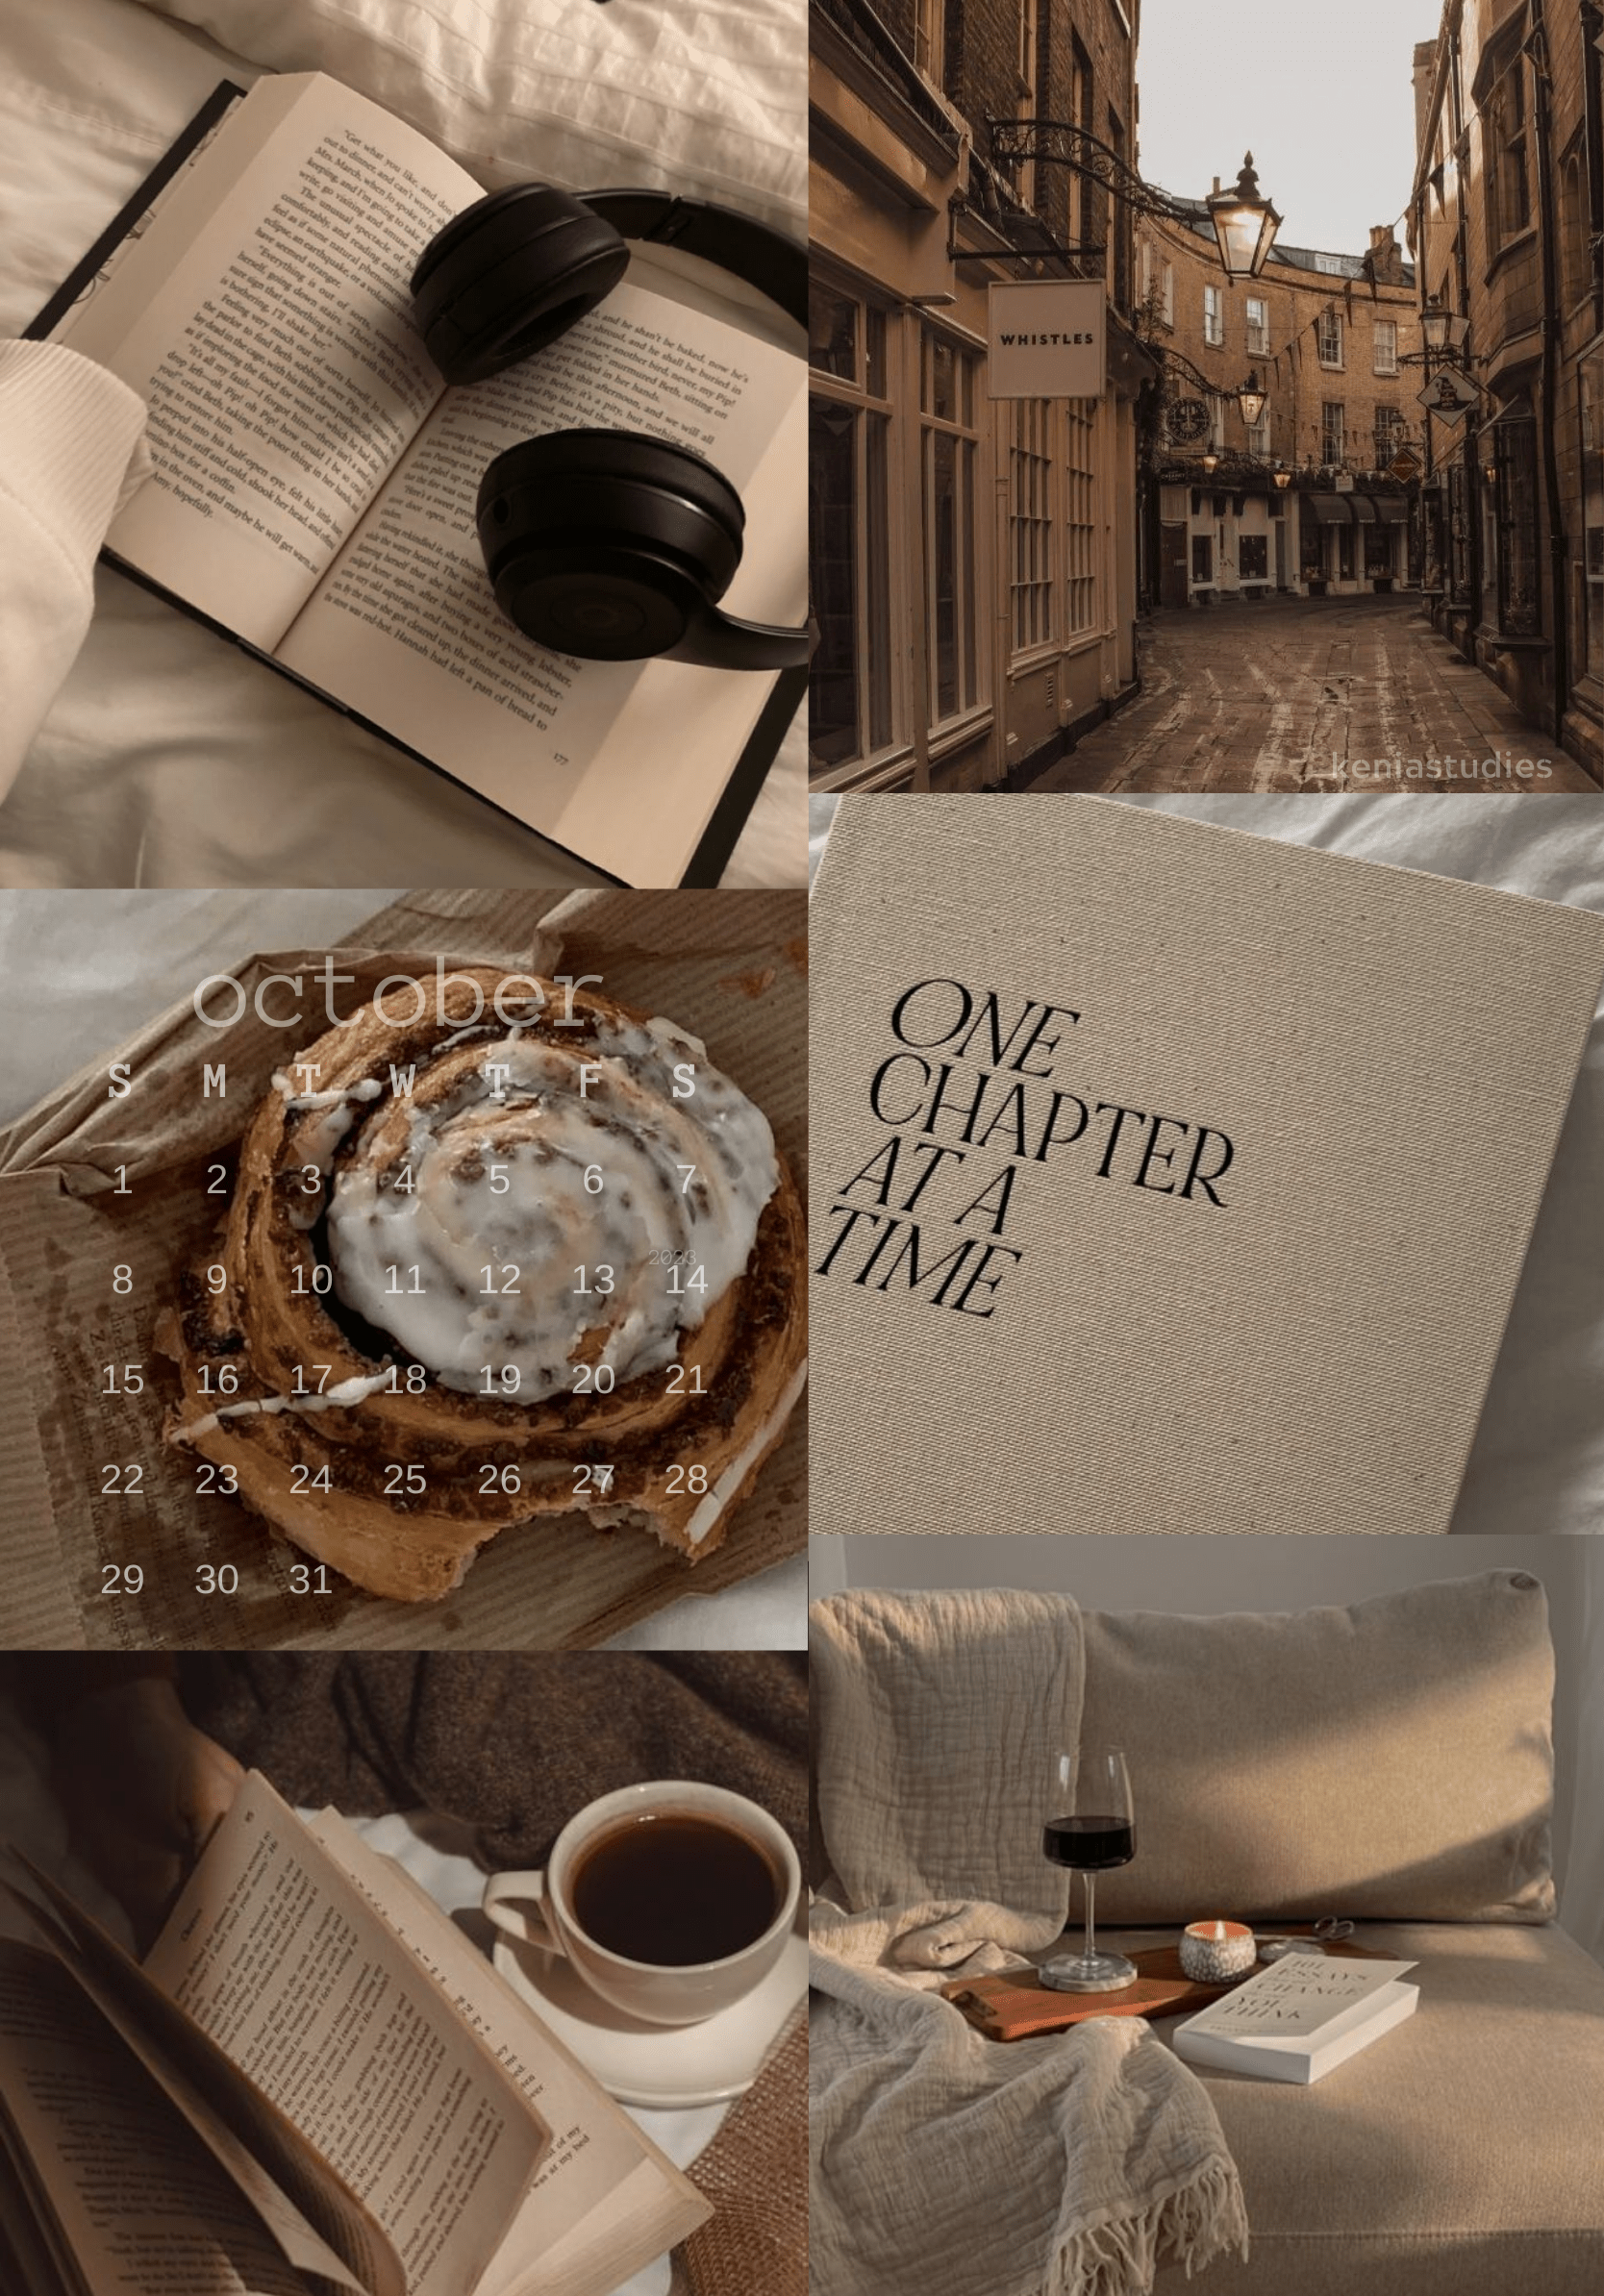 A collage of photos including books, a cup of coffee, a cinnamon roll, and a city street. - Light brown